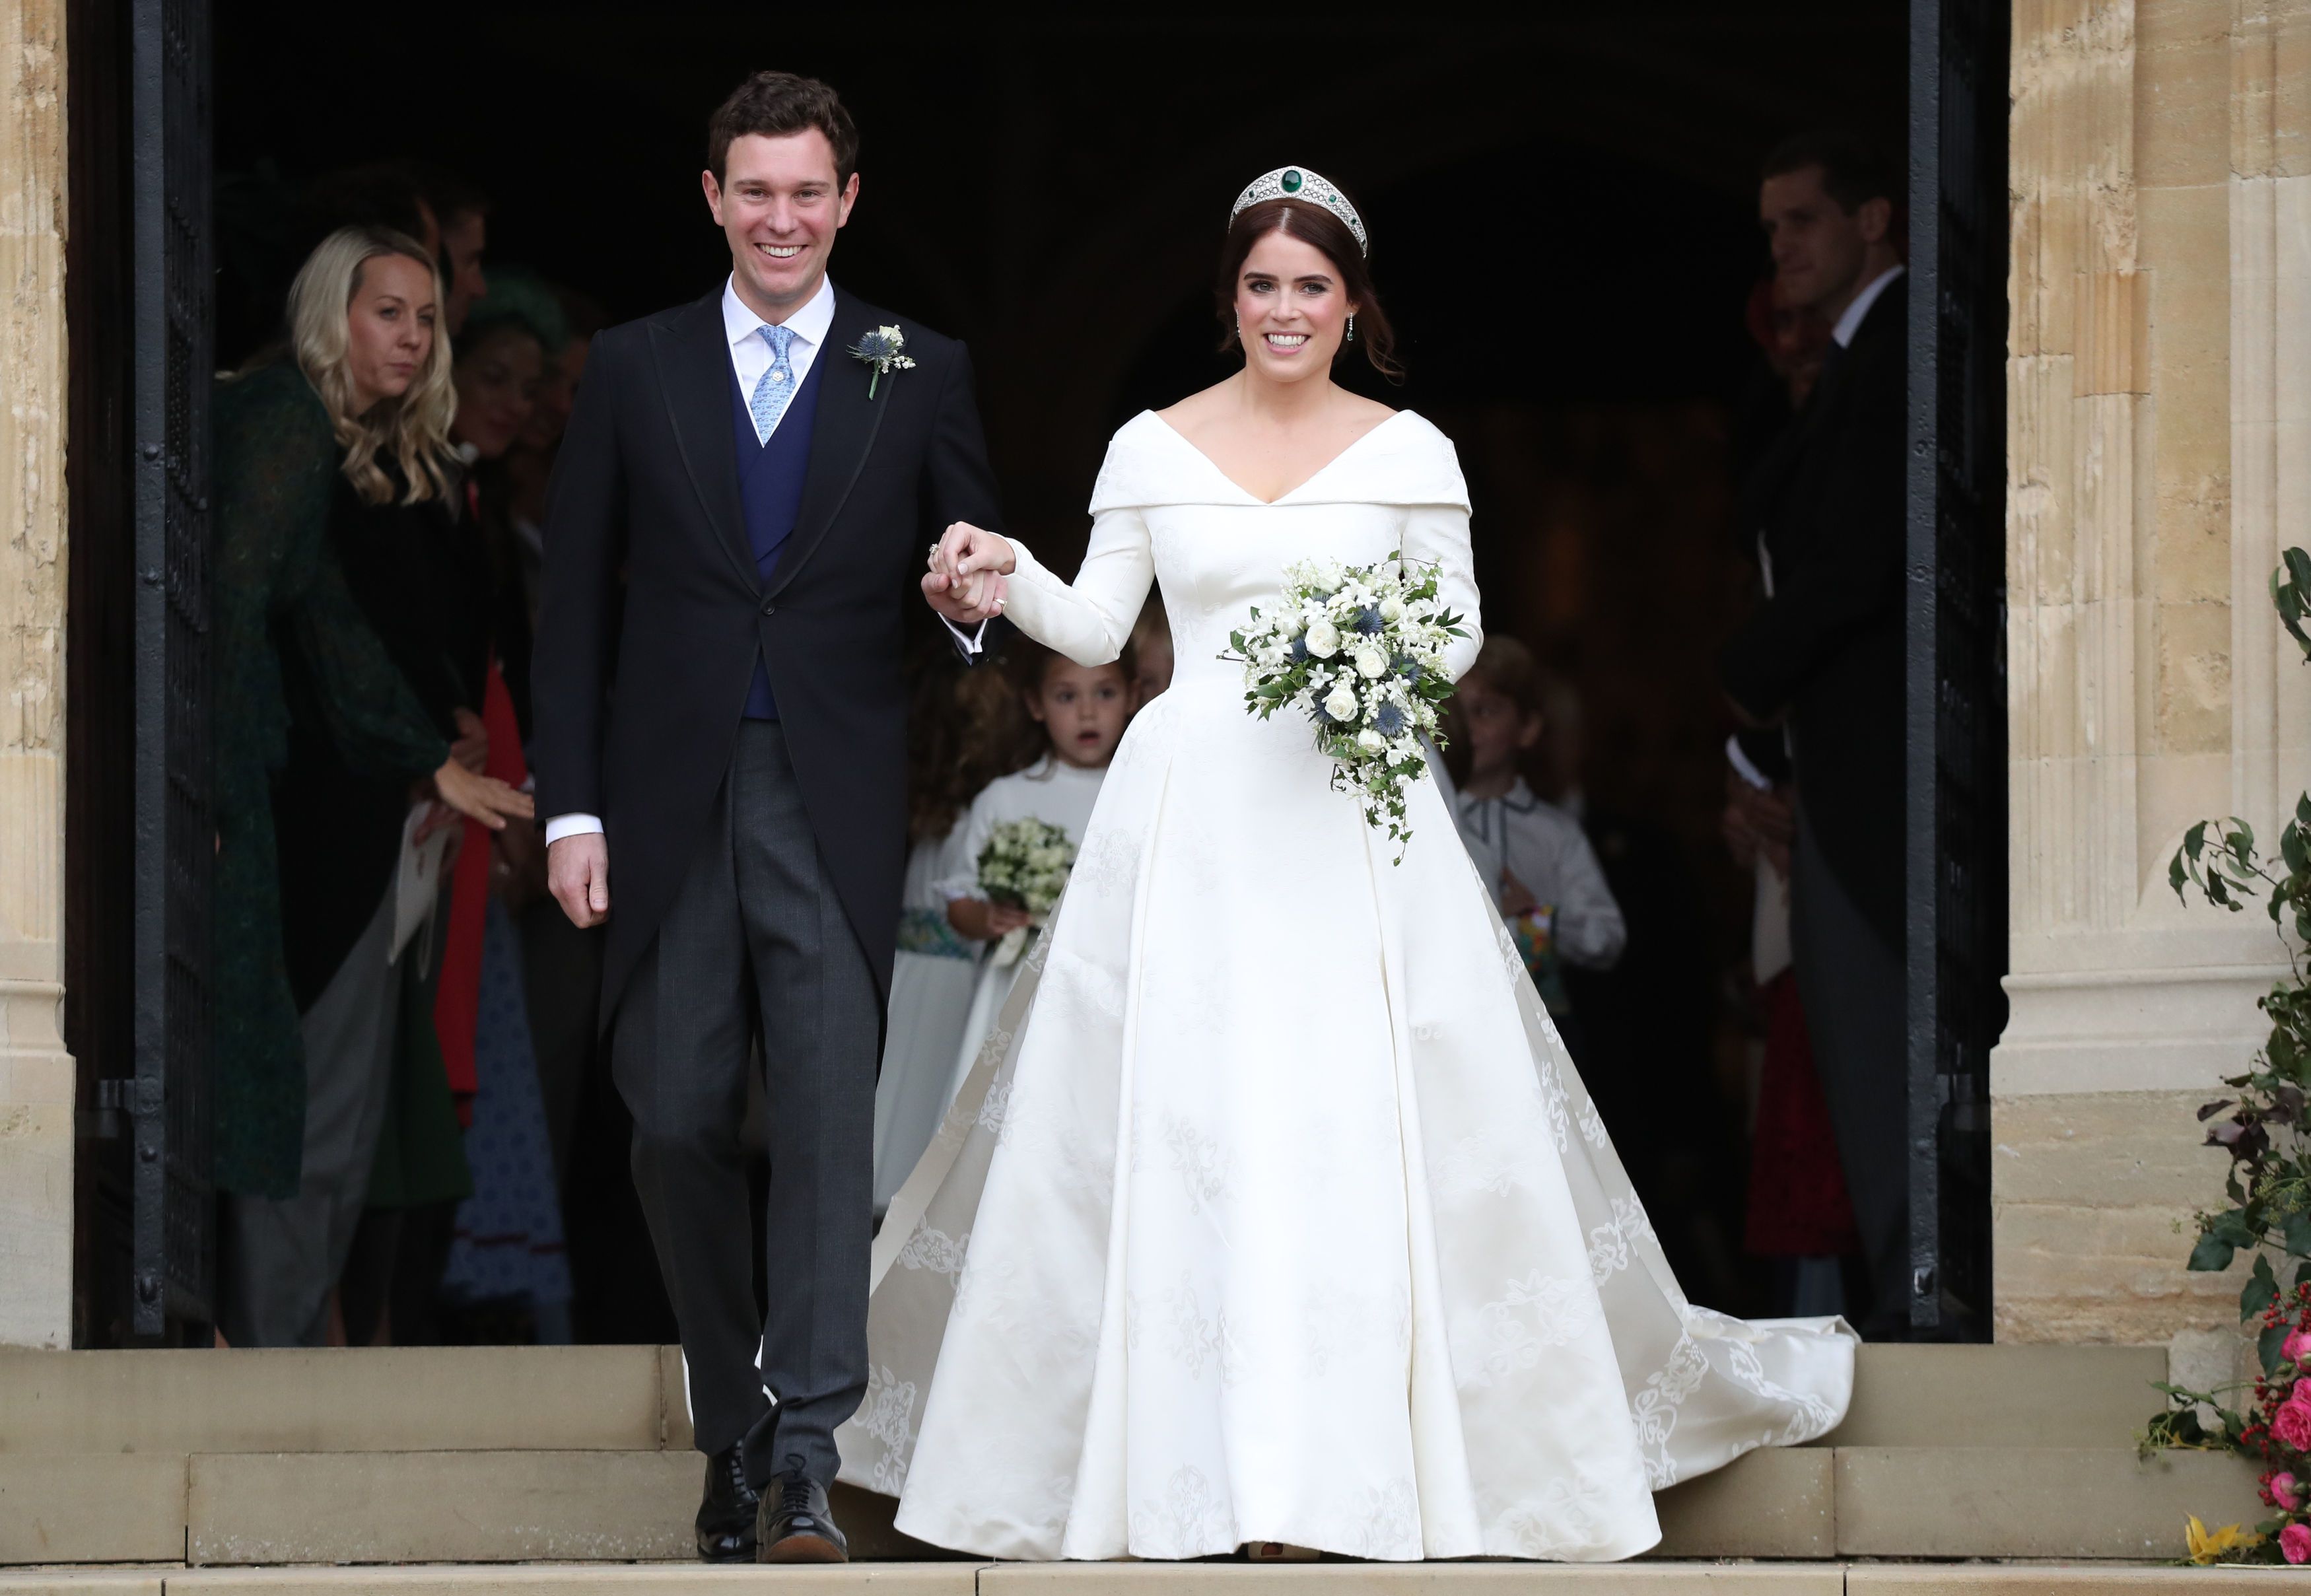 Princess Eugenie of York and her husband Jack Brooksbank during their wedding at St. George's Chapel on October 12, 2018 in Windsor, England. | Photo: Getty Images